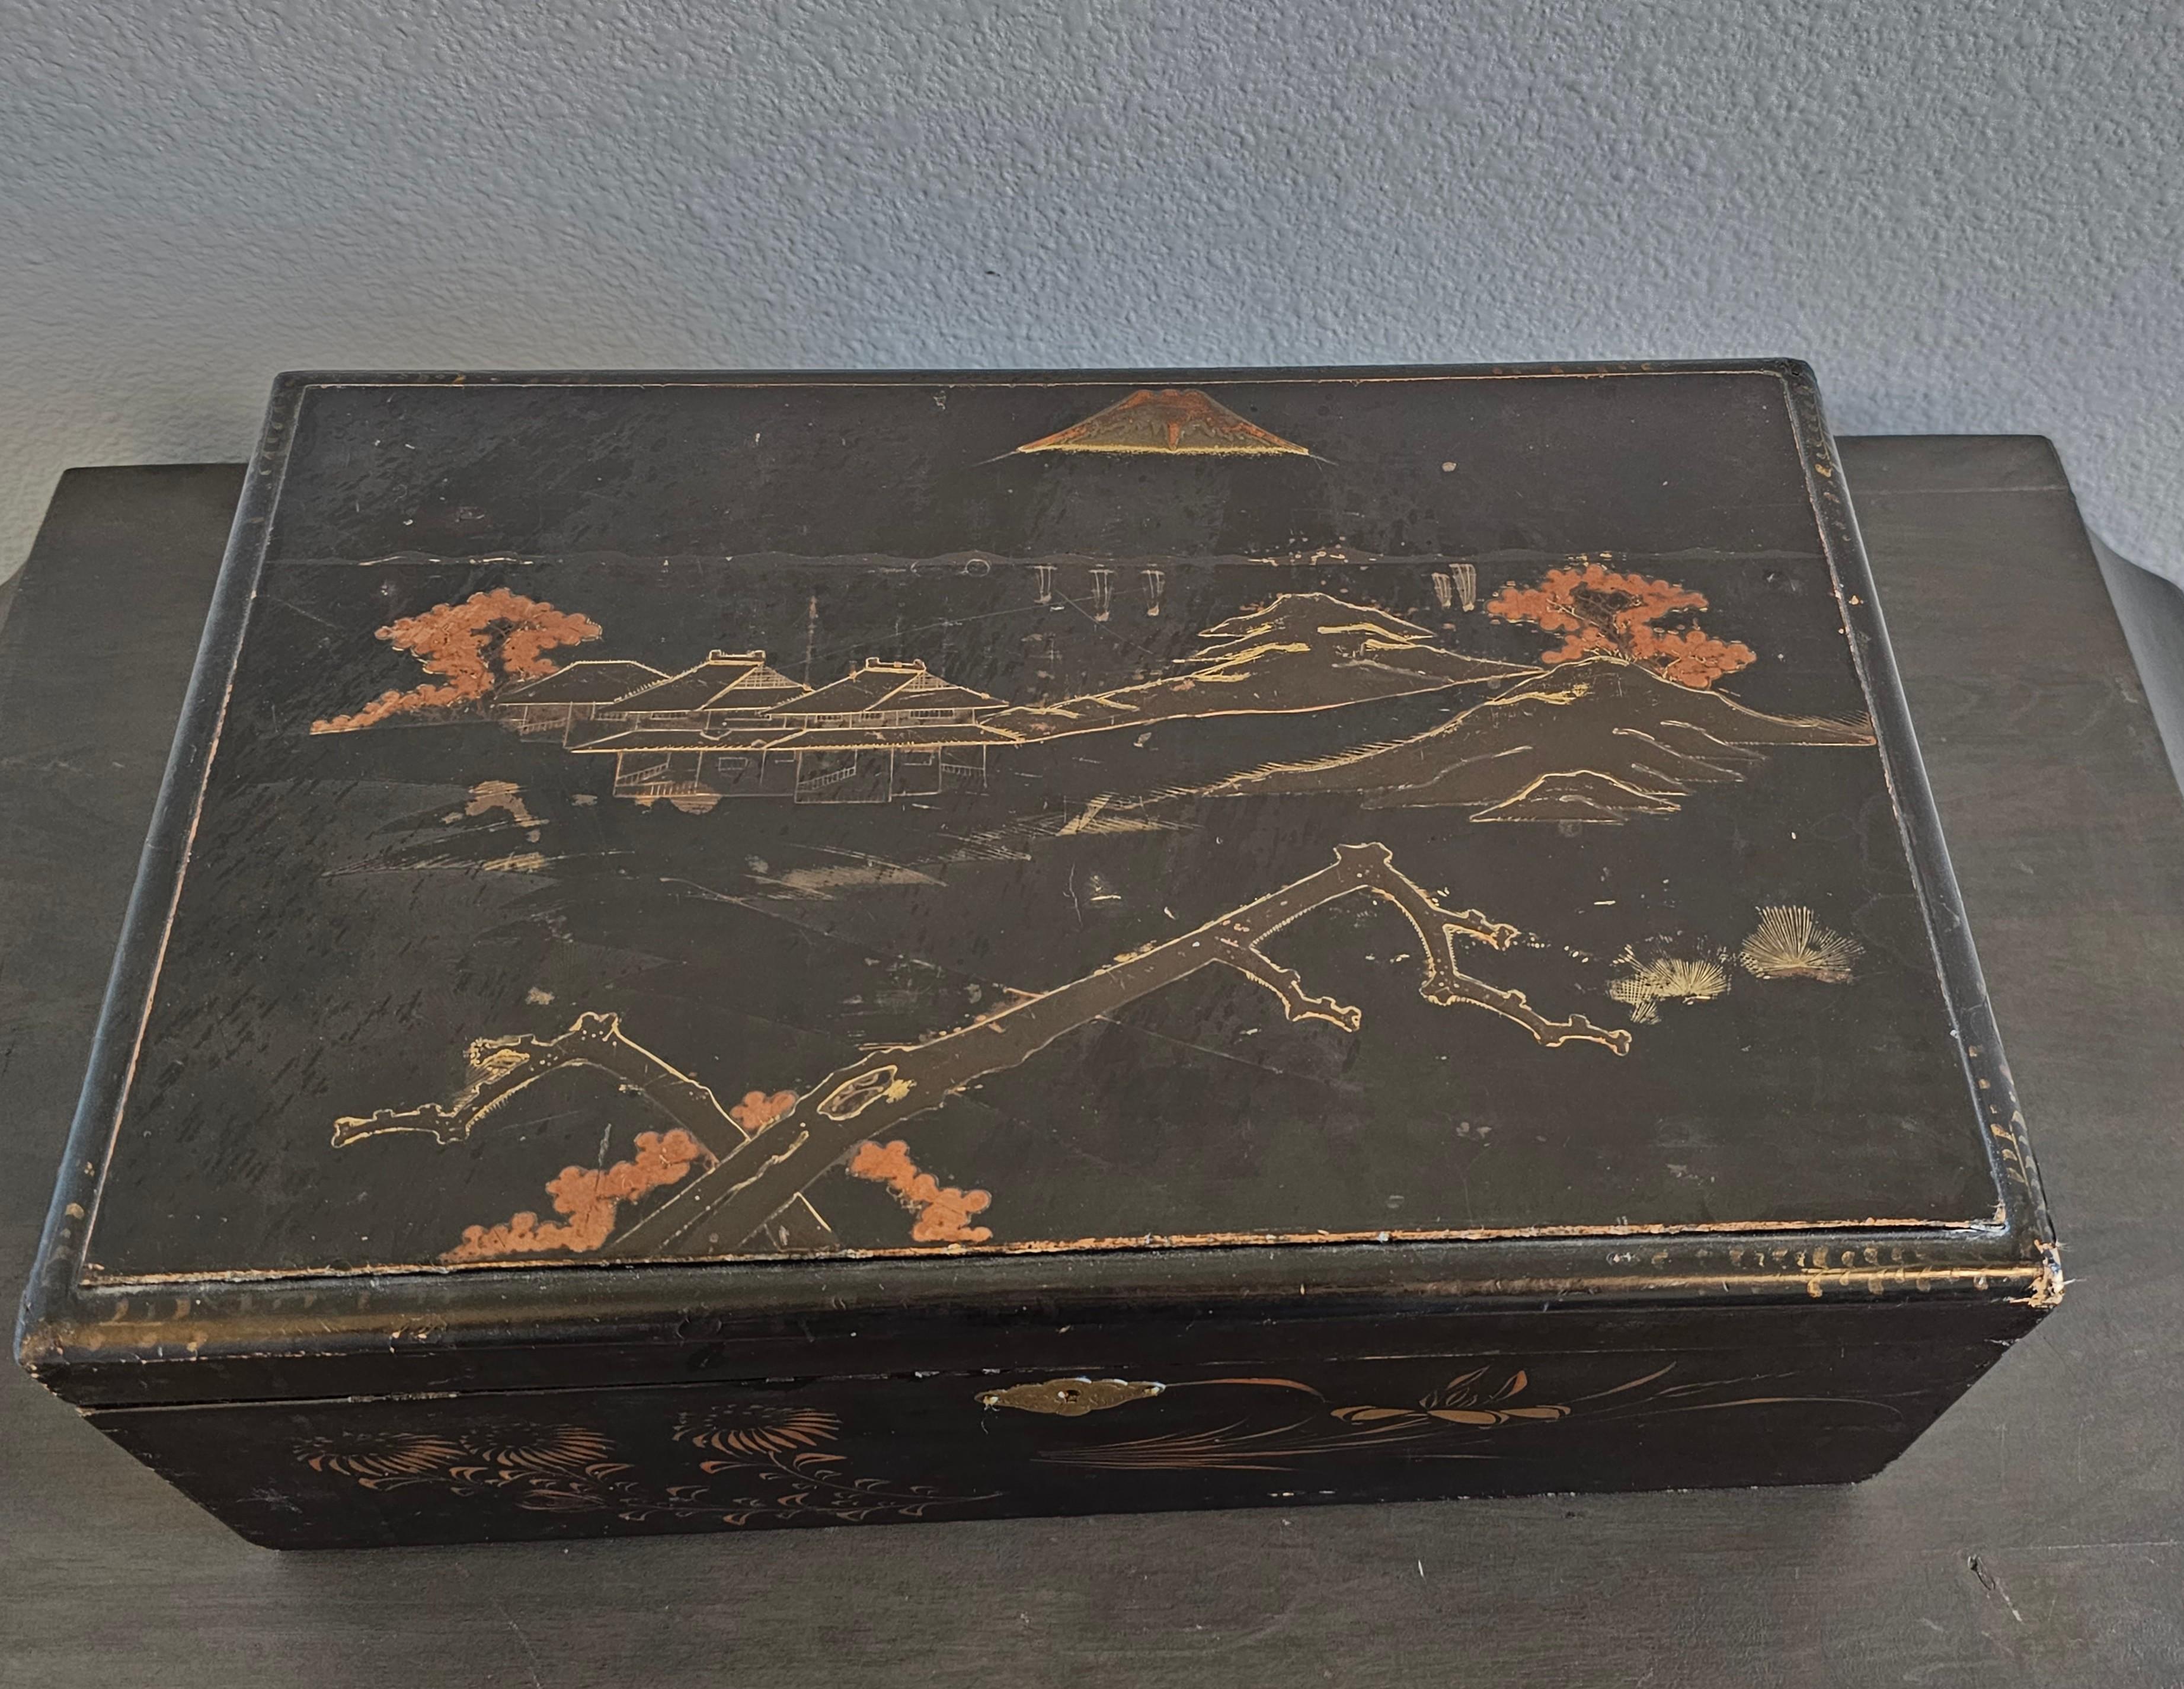 A scarce antique, circa 1900, Japanese black lacquered wood writing slope / travel desk / document box. 

Born in Japan in the early 20th century, influenced by English Colonial Regency era campaign furniture, rectangular chest form, having a